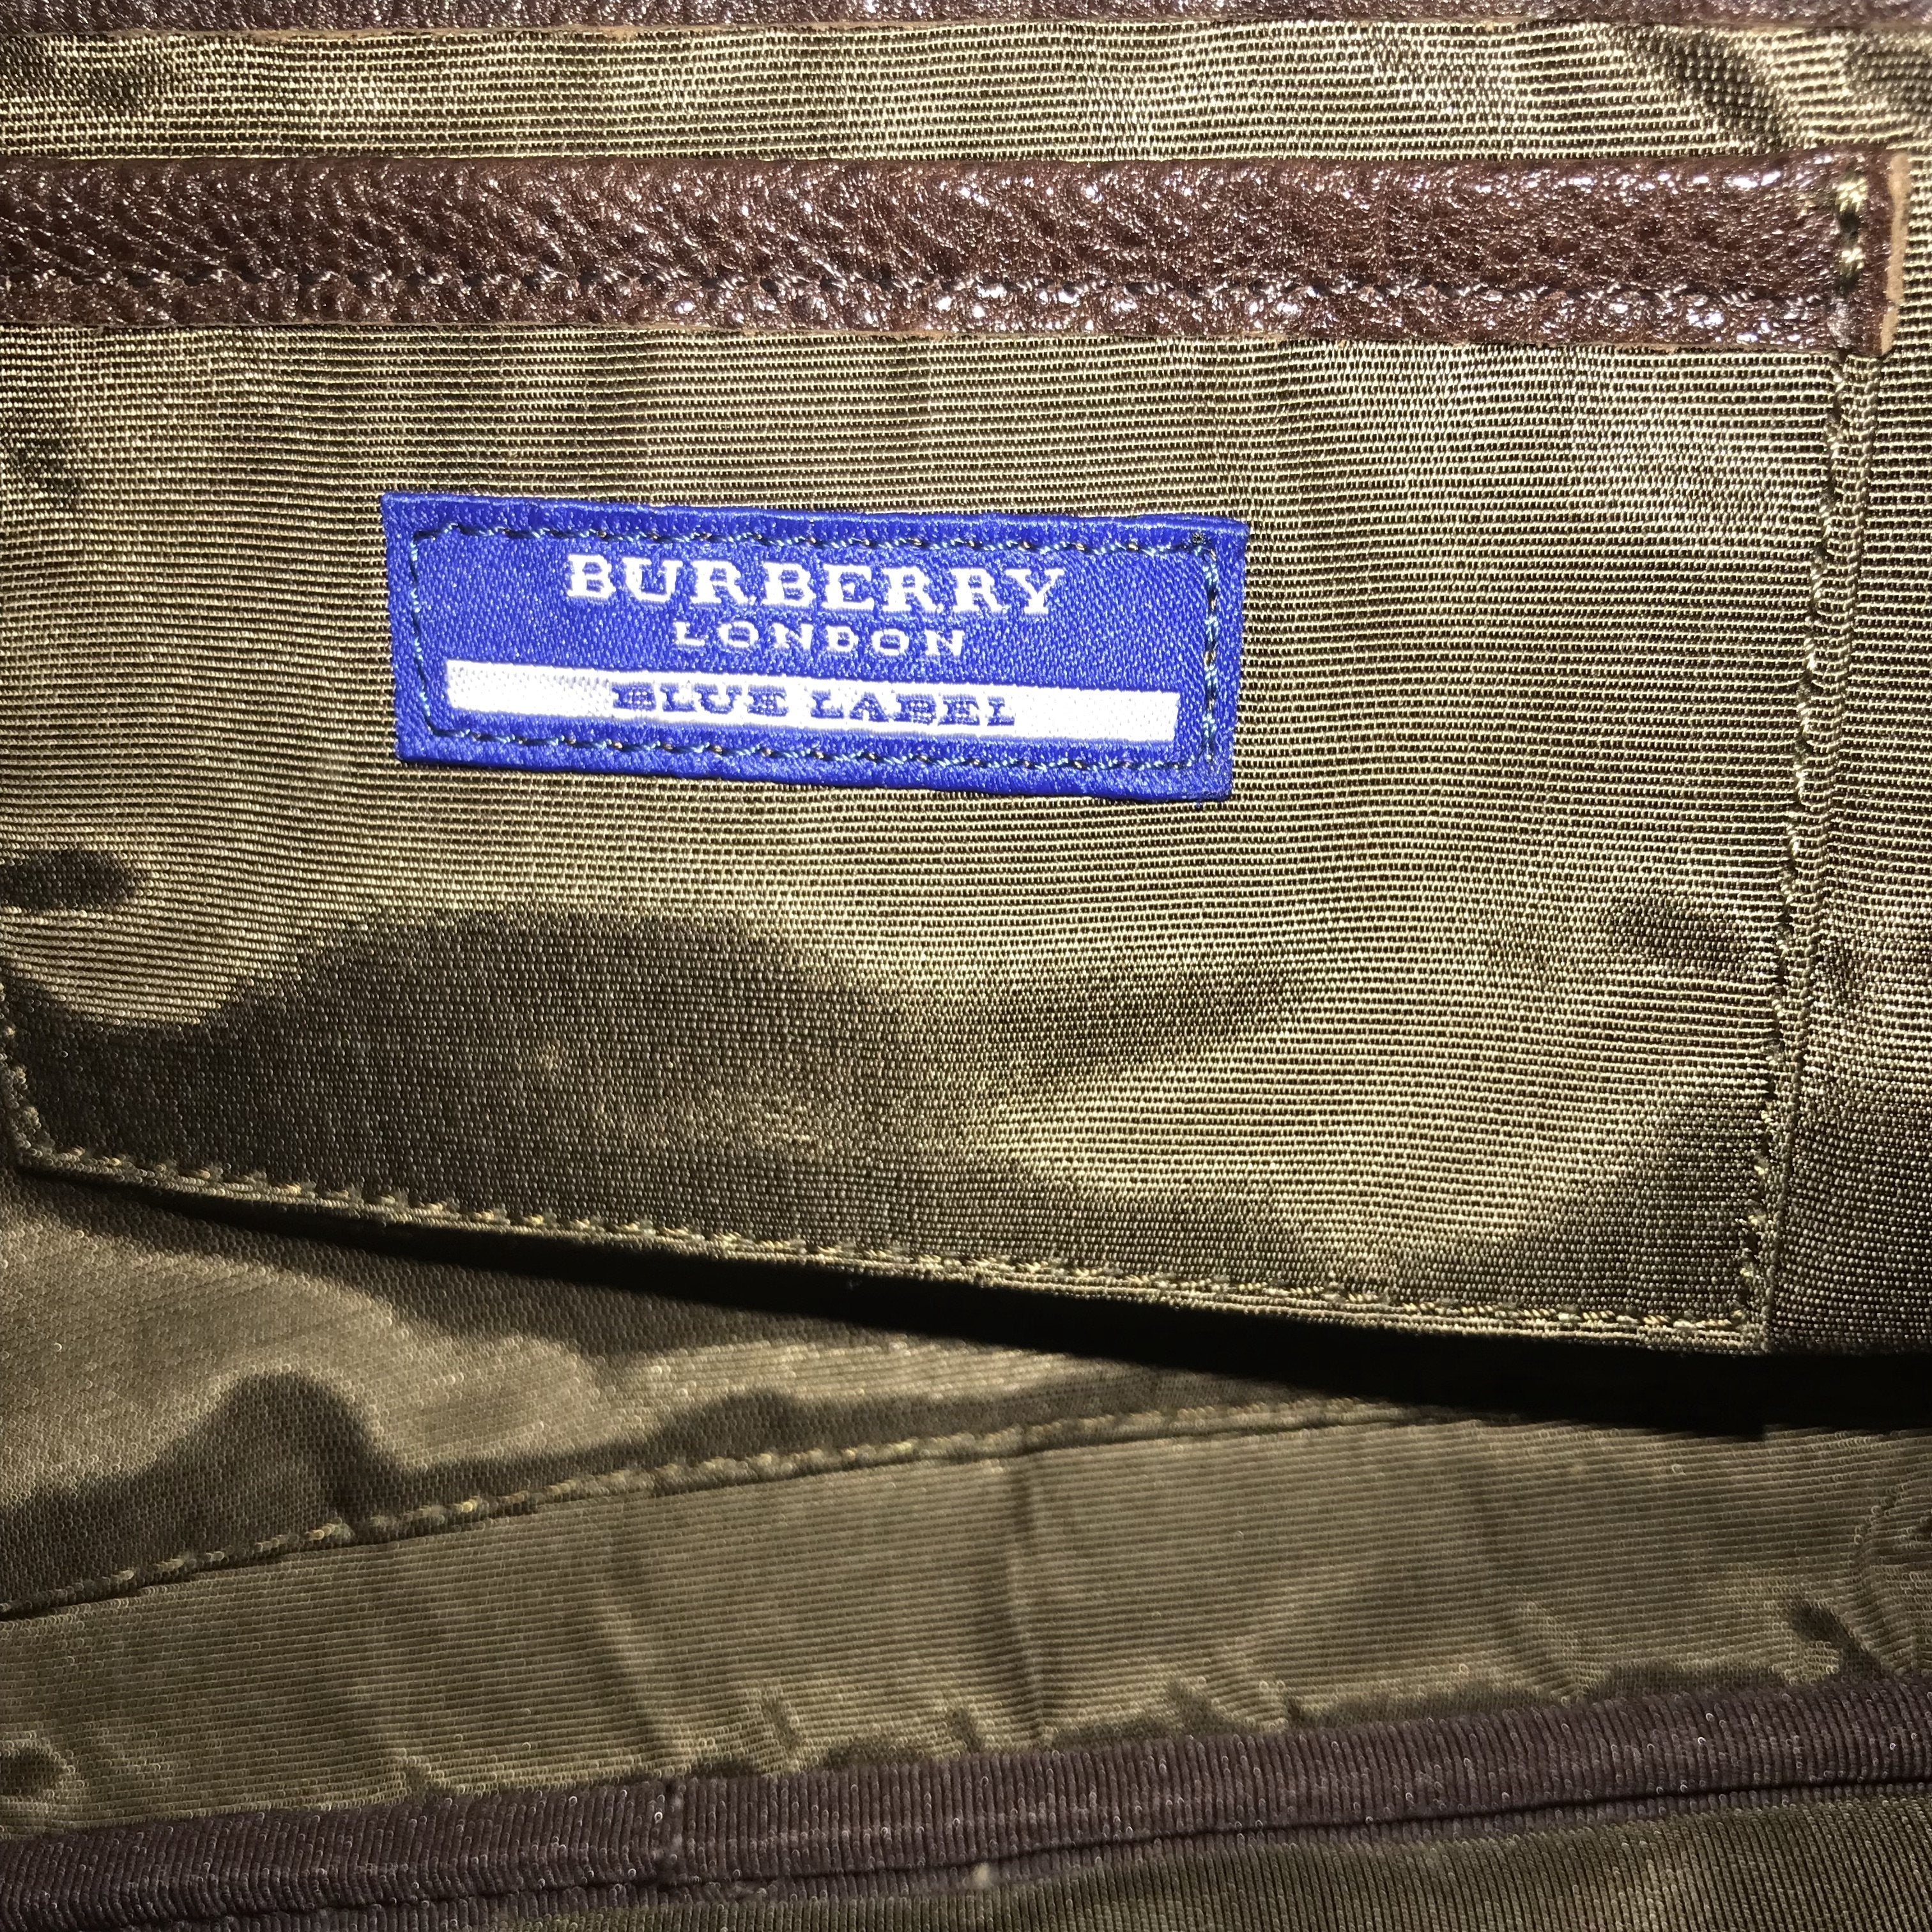 Preowned Authentic Burberry Blue Label Wallet